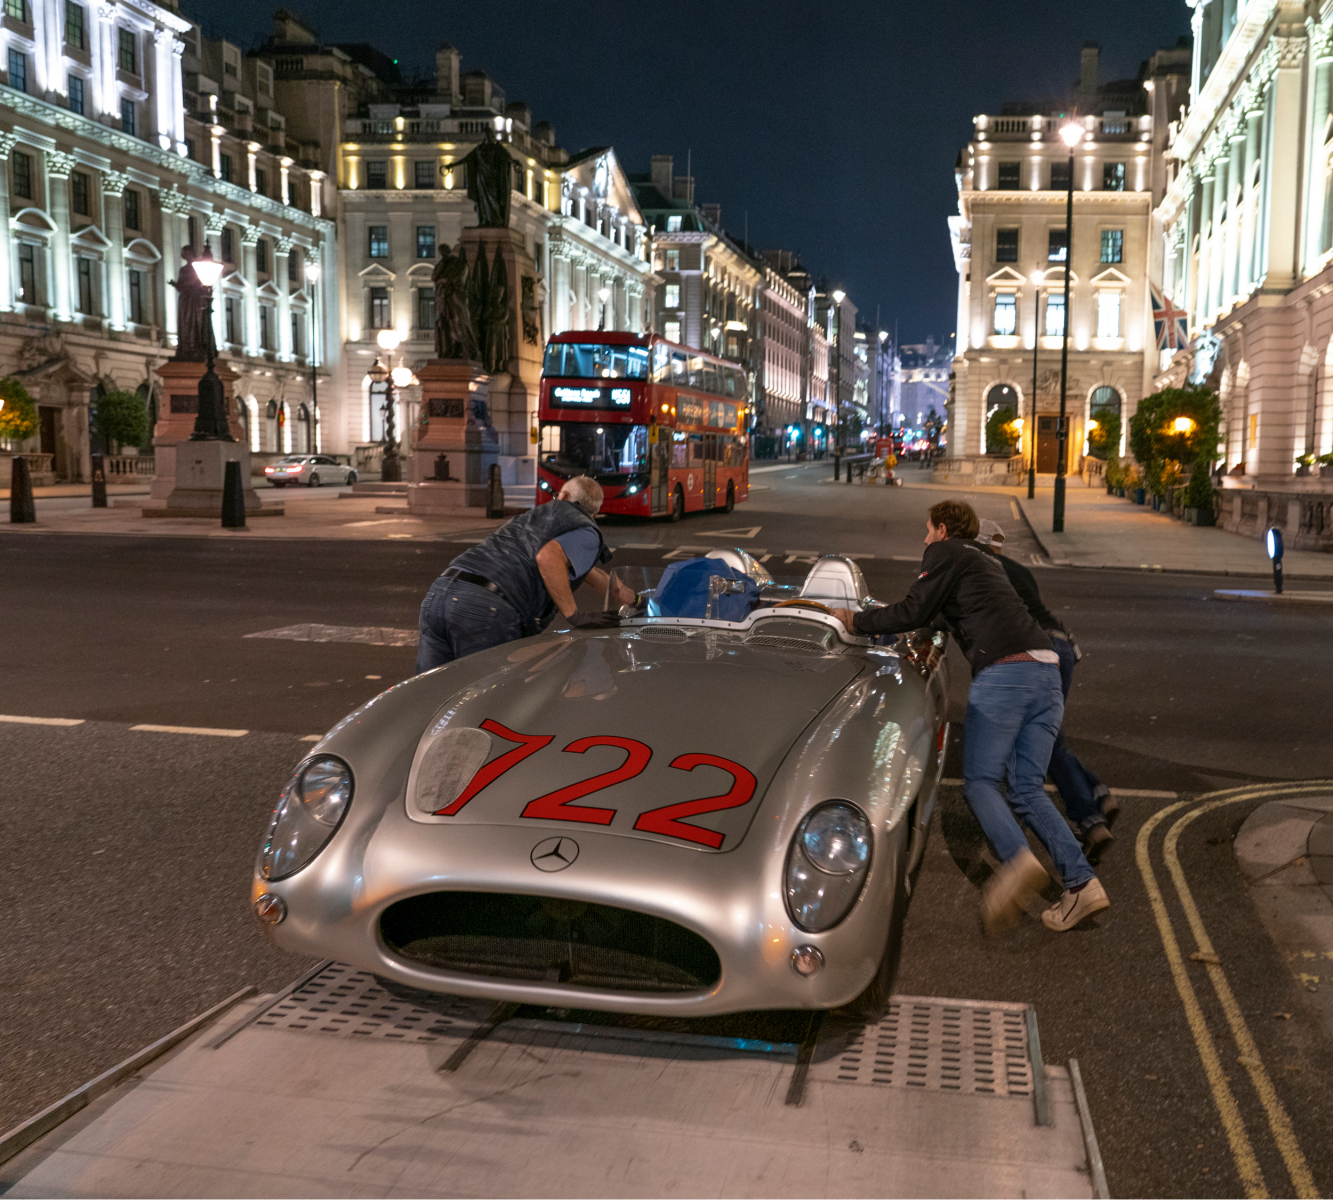 Mercedes-Benz 300 SLR “722” (W 196 S). Filming with the racing sports car for the short film “The Last Blast”, end of September 2021. With the unique drive through London, Mercedes-Benz Classic honored the life of Sir Stirling Moss, who died on 12 April 2020 at the age of 90. The racing driver and his co-driver Denis Jenkinson won the 1955 Mille Miglia with this car. Provision of vehicle.